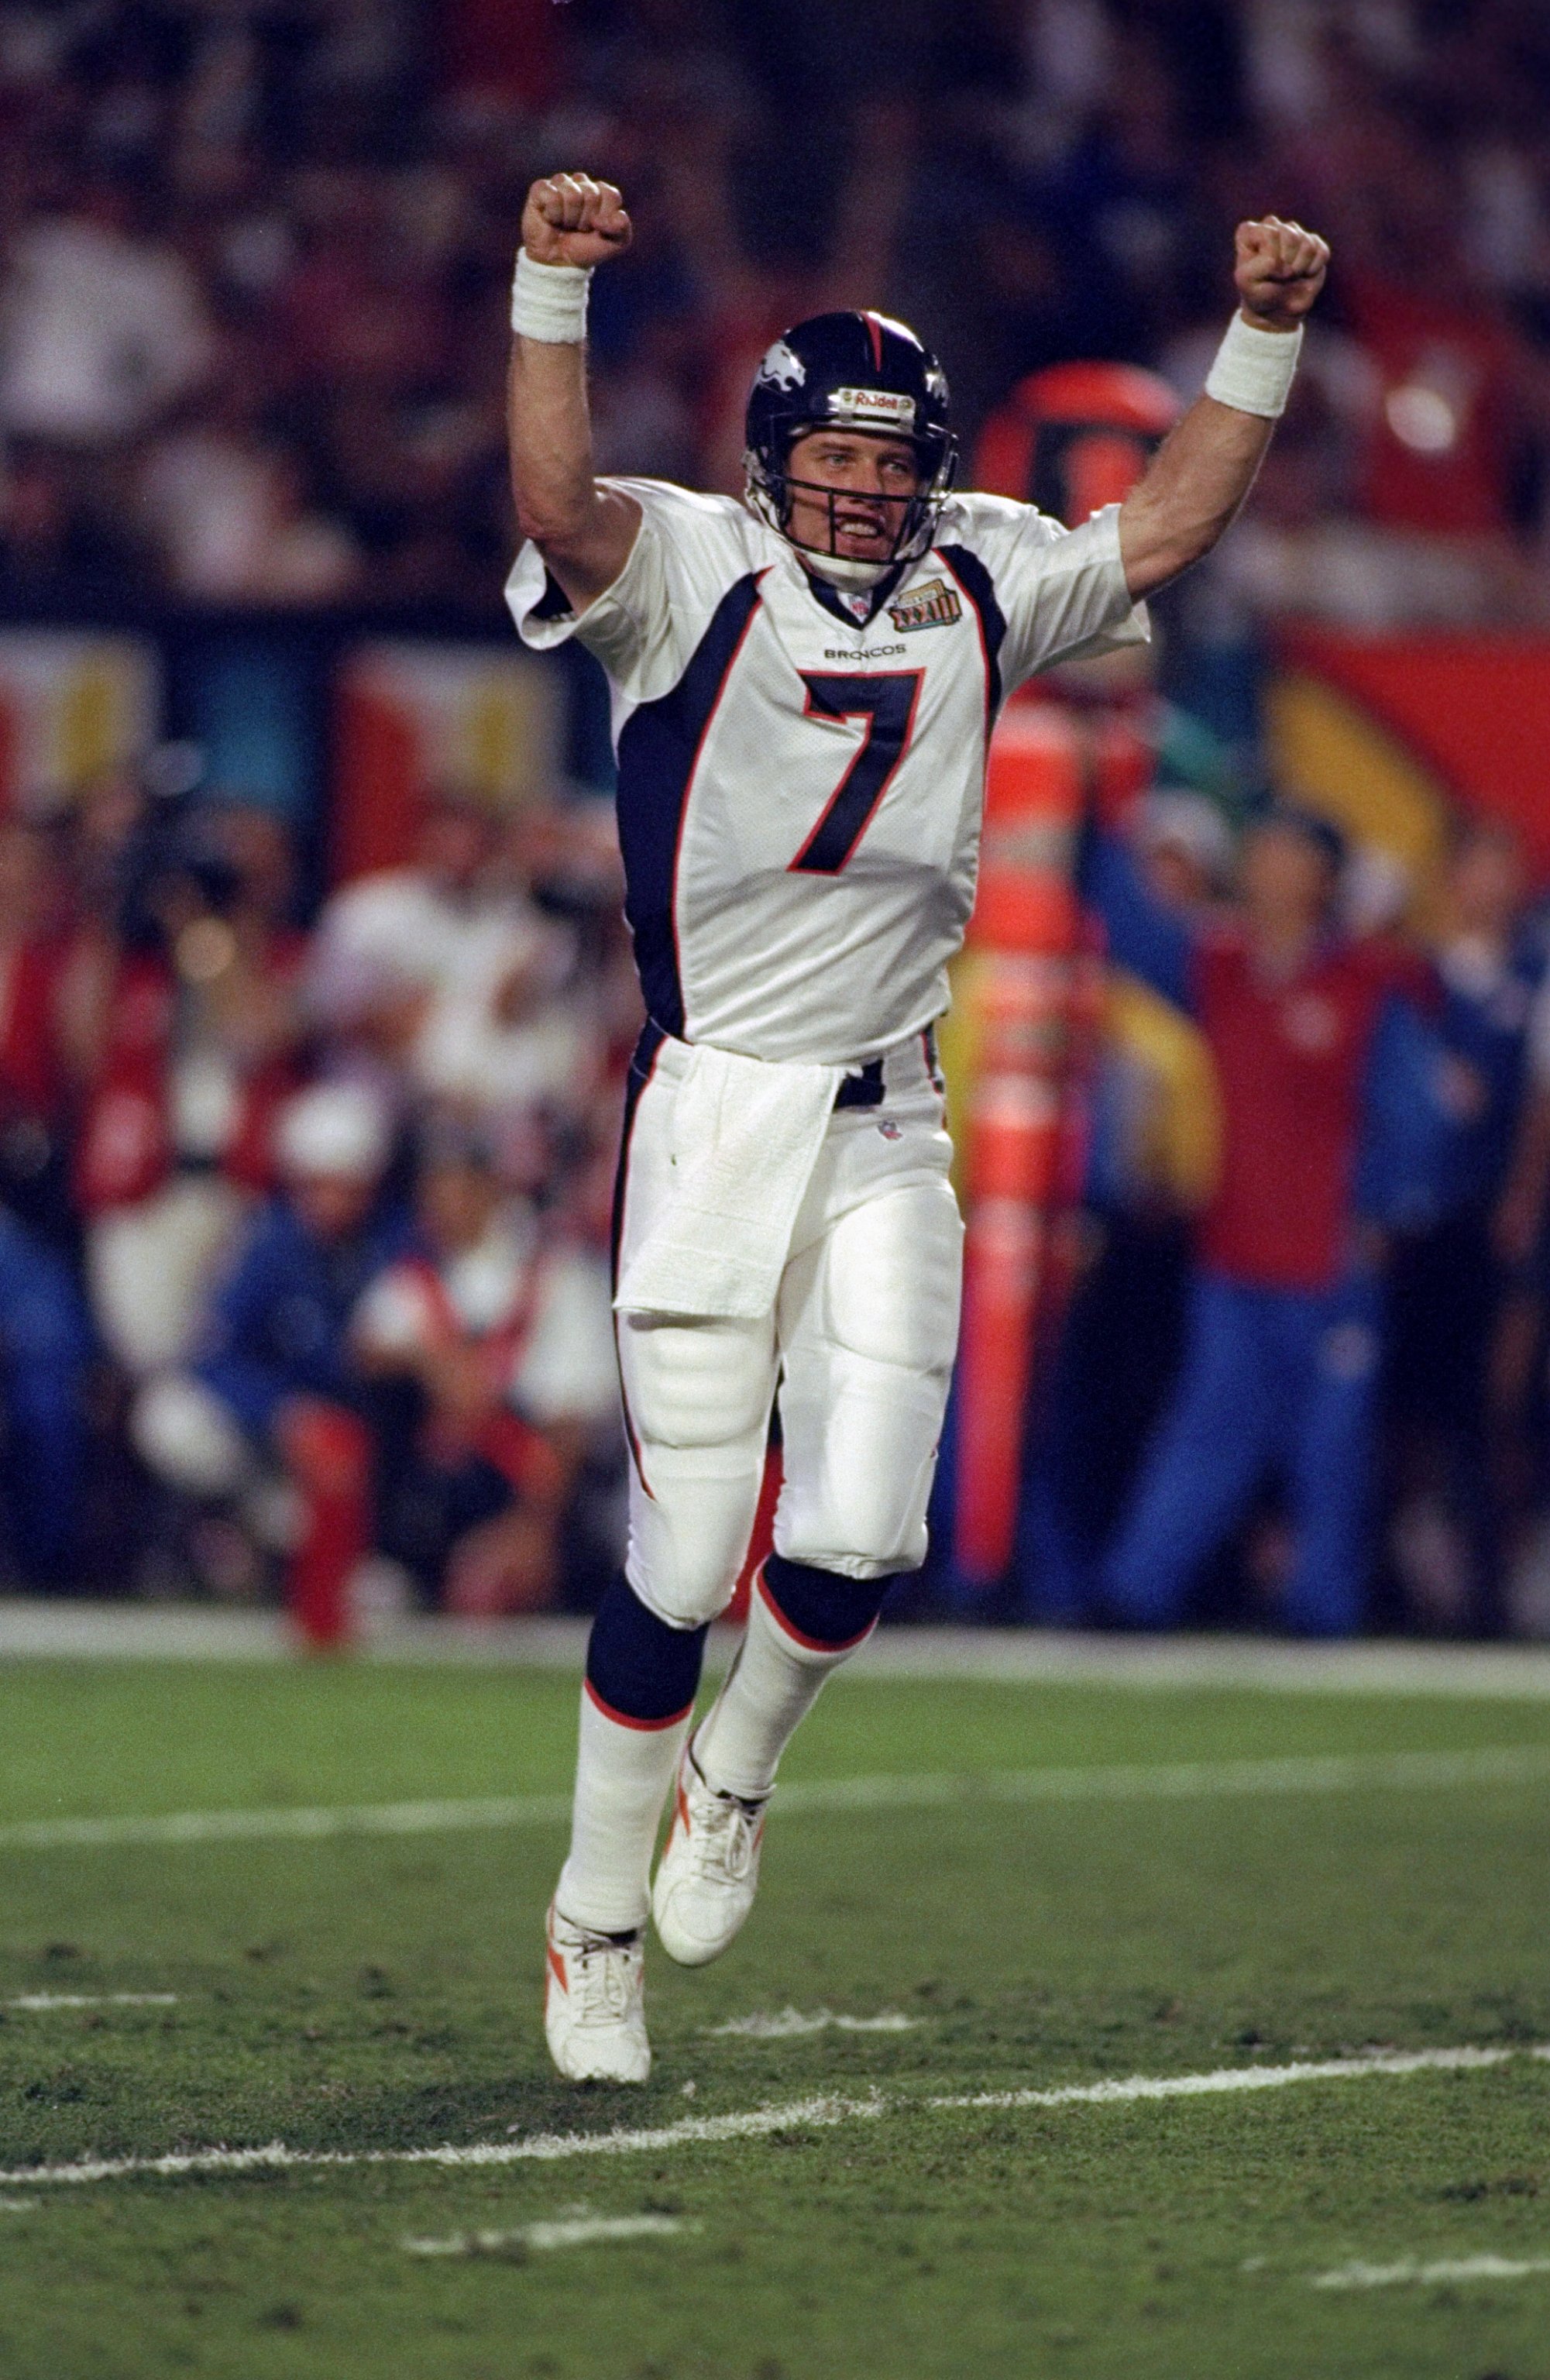 31 Jan 1999: Quarterback John Elway #7 of the Denver Broncos celebrates the first touchdown during the first quarter of Super Bowl XXXIII against the Atlanta Falcons at Pro Player Stadium in Miami, Florida. The Broncos defeated the Falcons 34-19 to win th